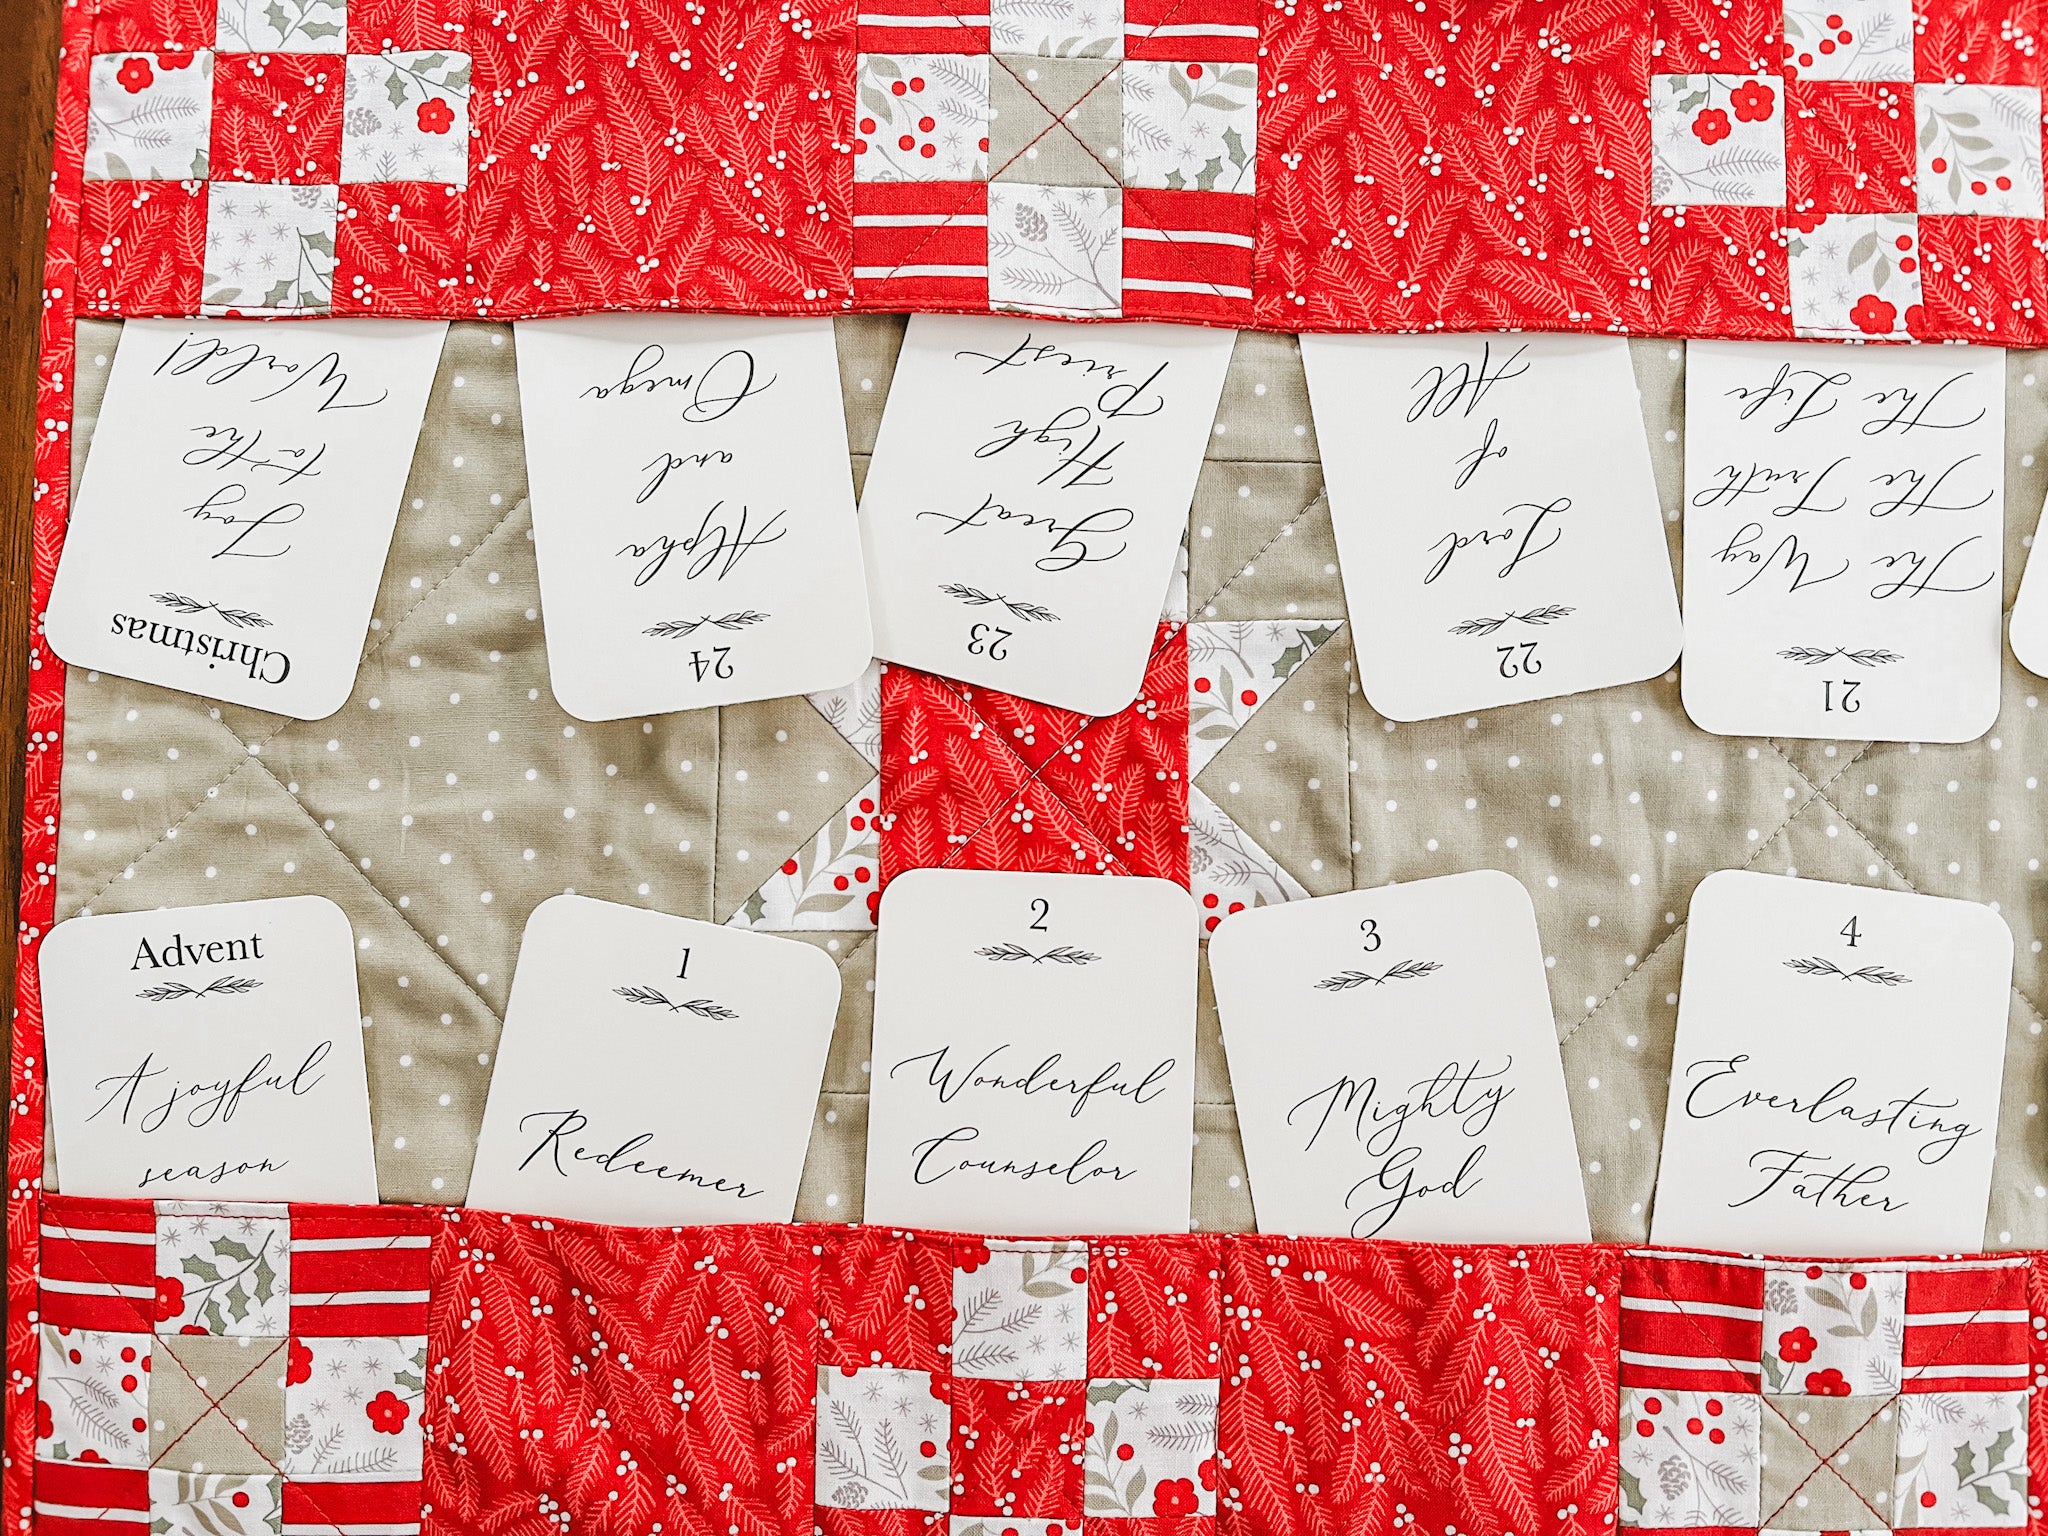 Names of Jesus Advent Cards - Count Down to Christmas - Pockets Full of Blessings Quilted Table Runner Pattern Collection